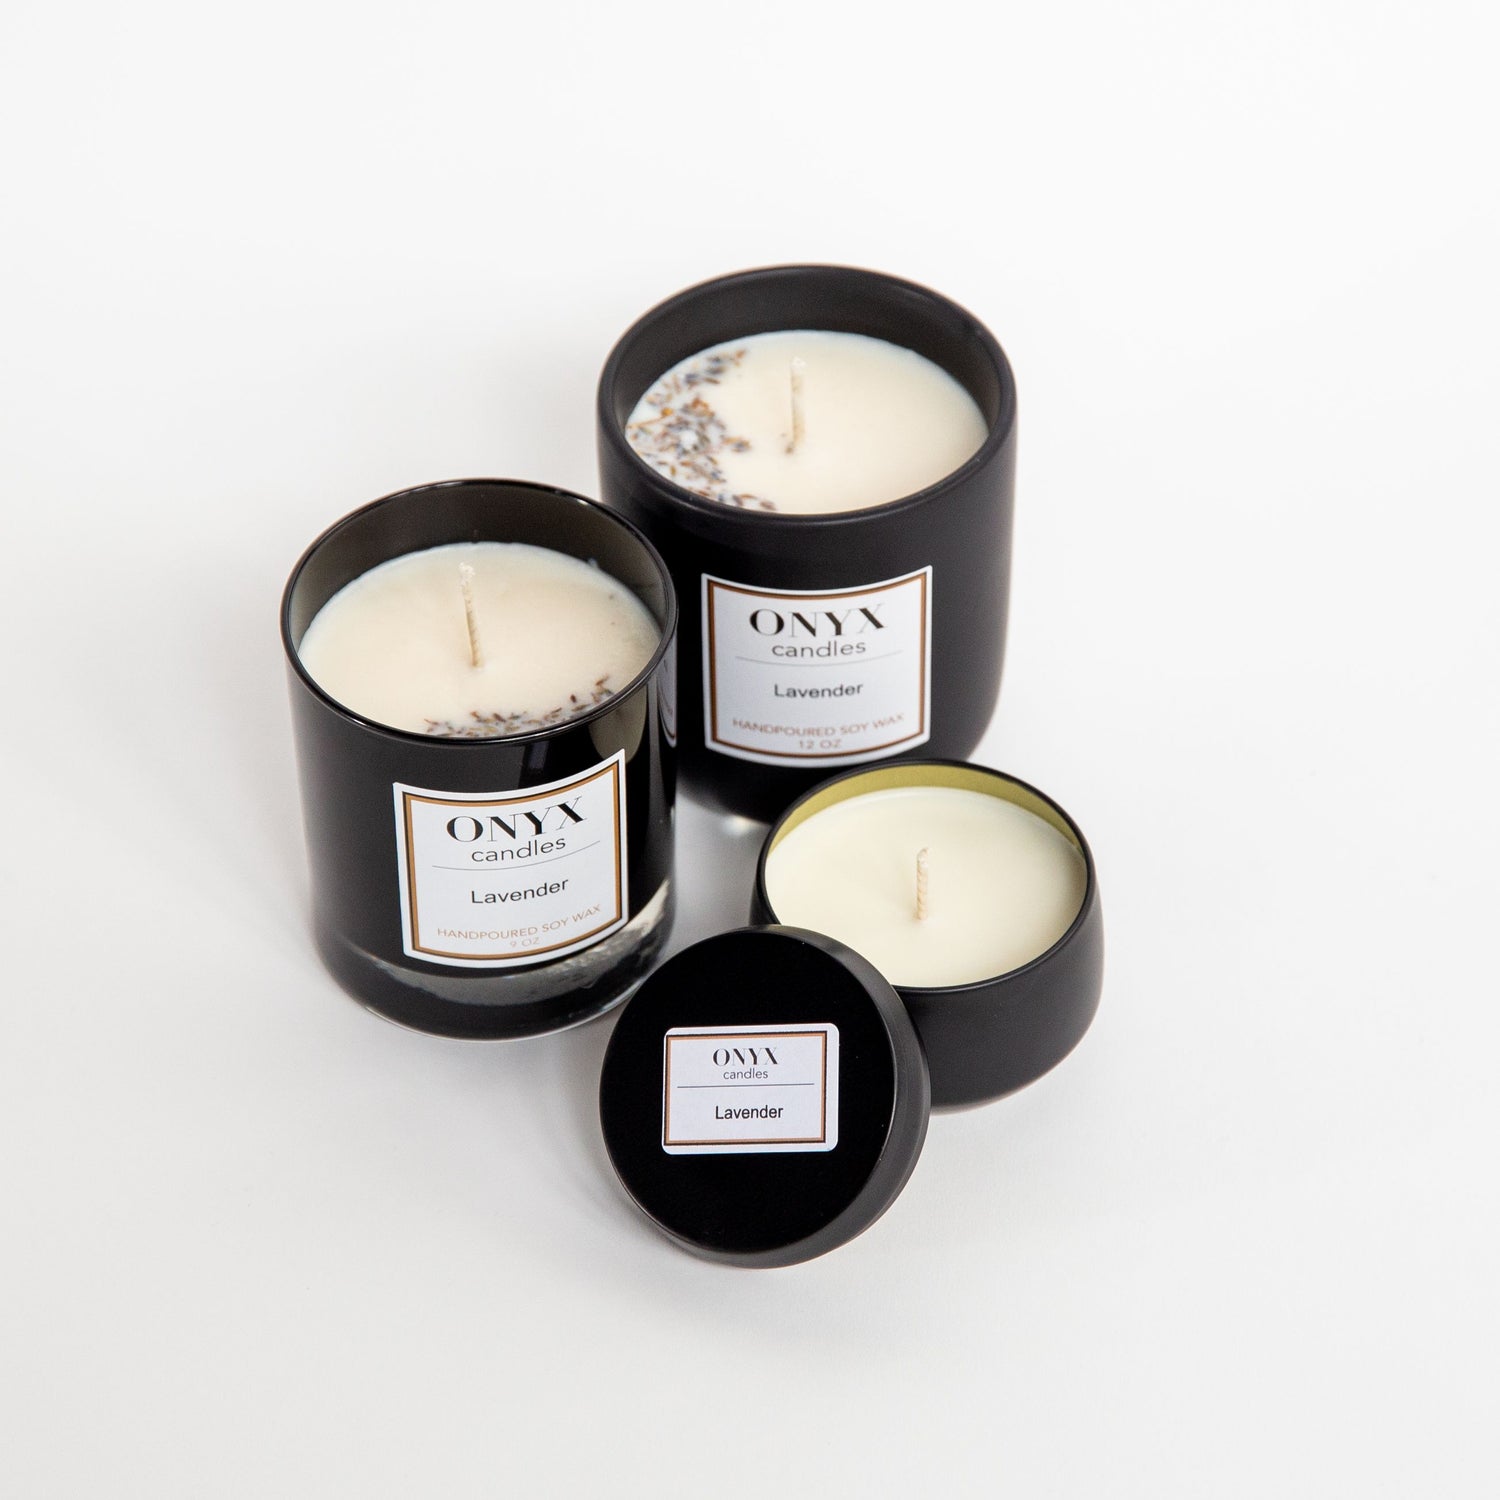 Pictured are three size variants of Onyx candles in the scent Lavender